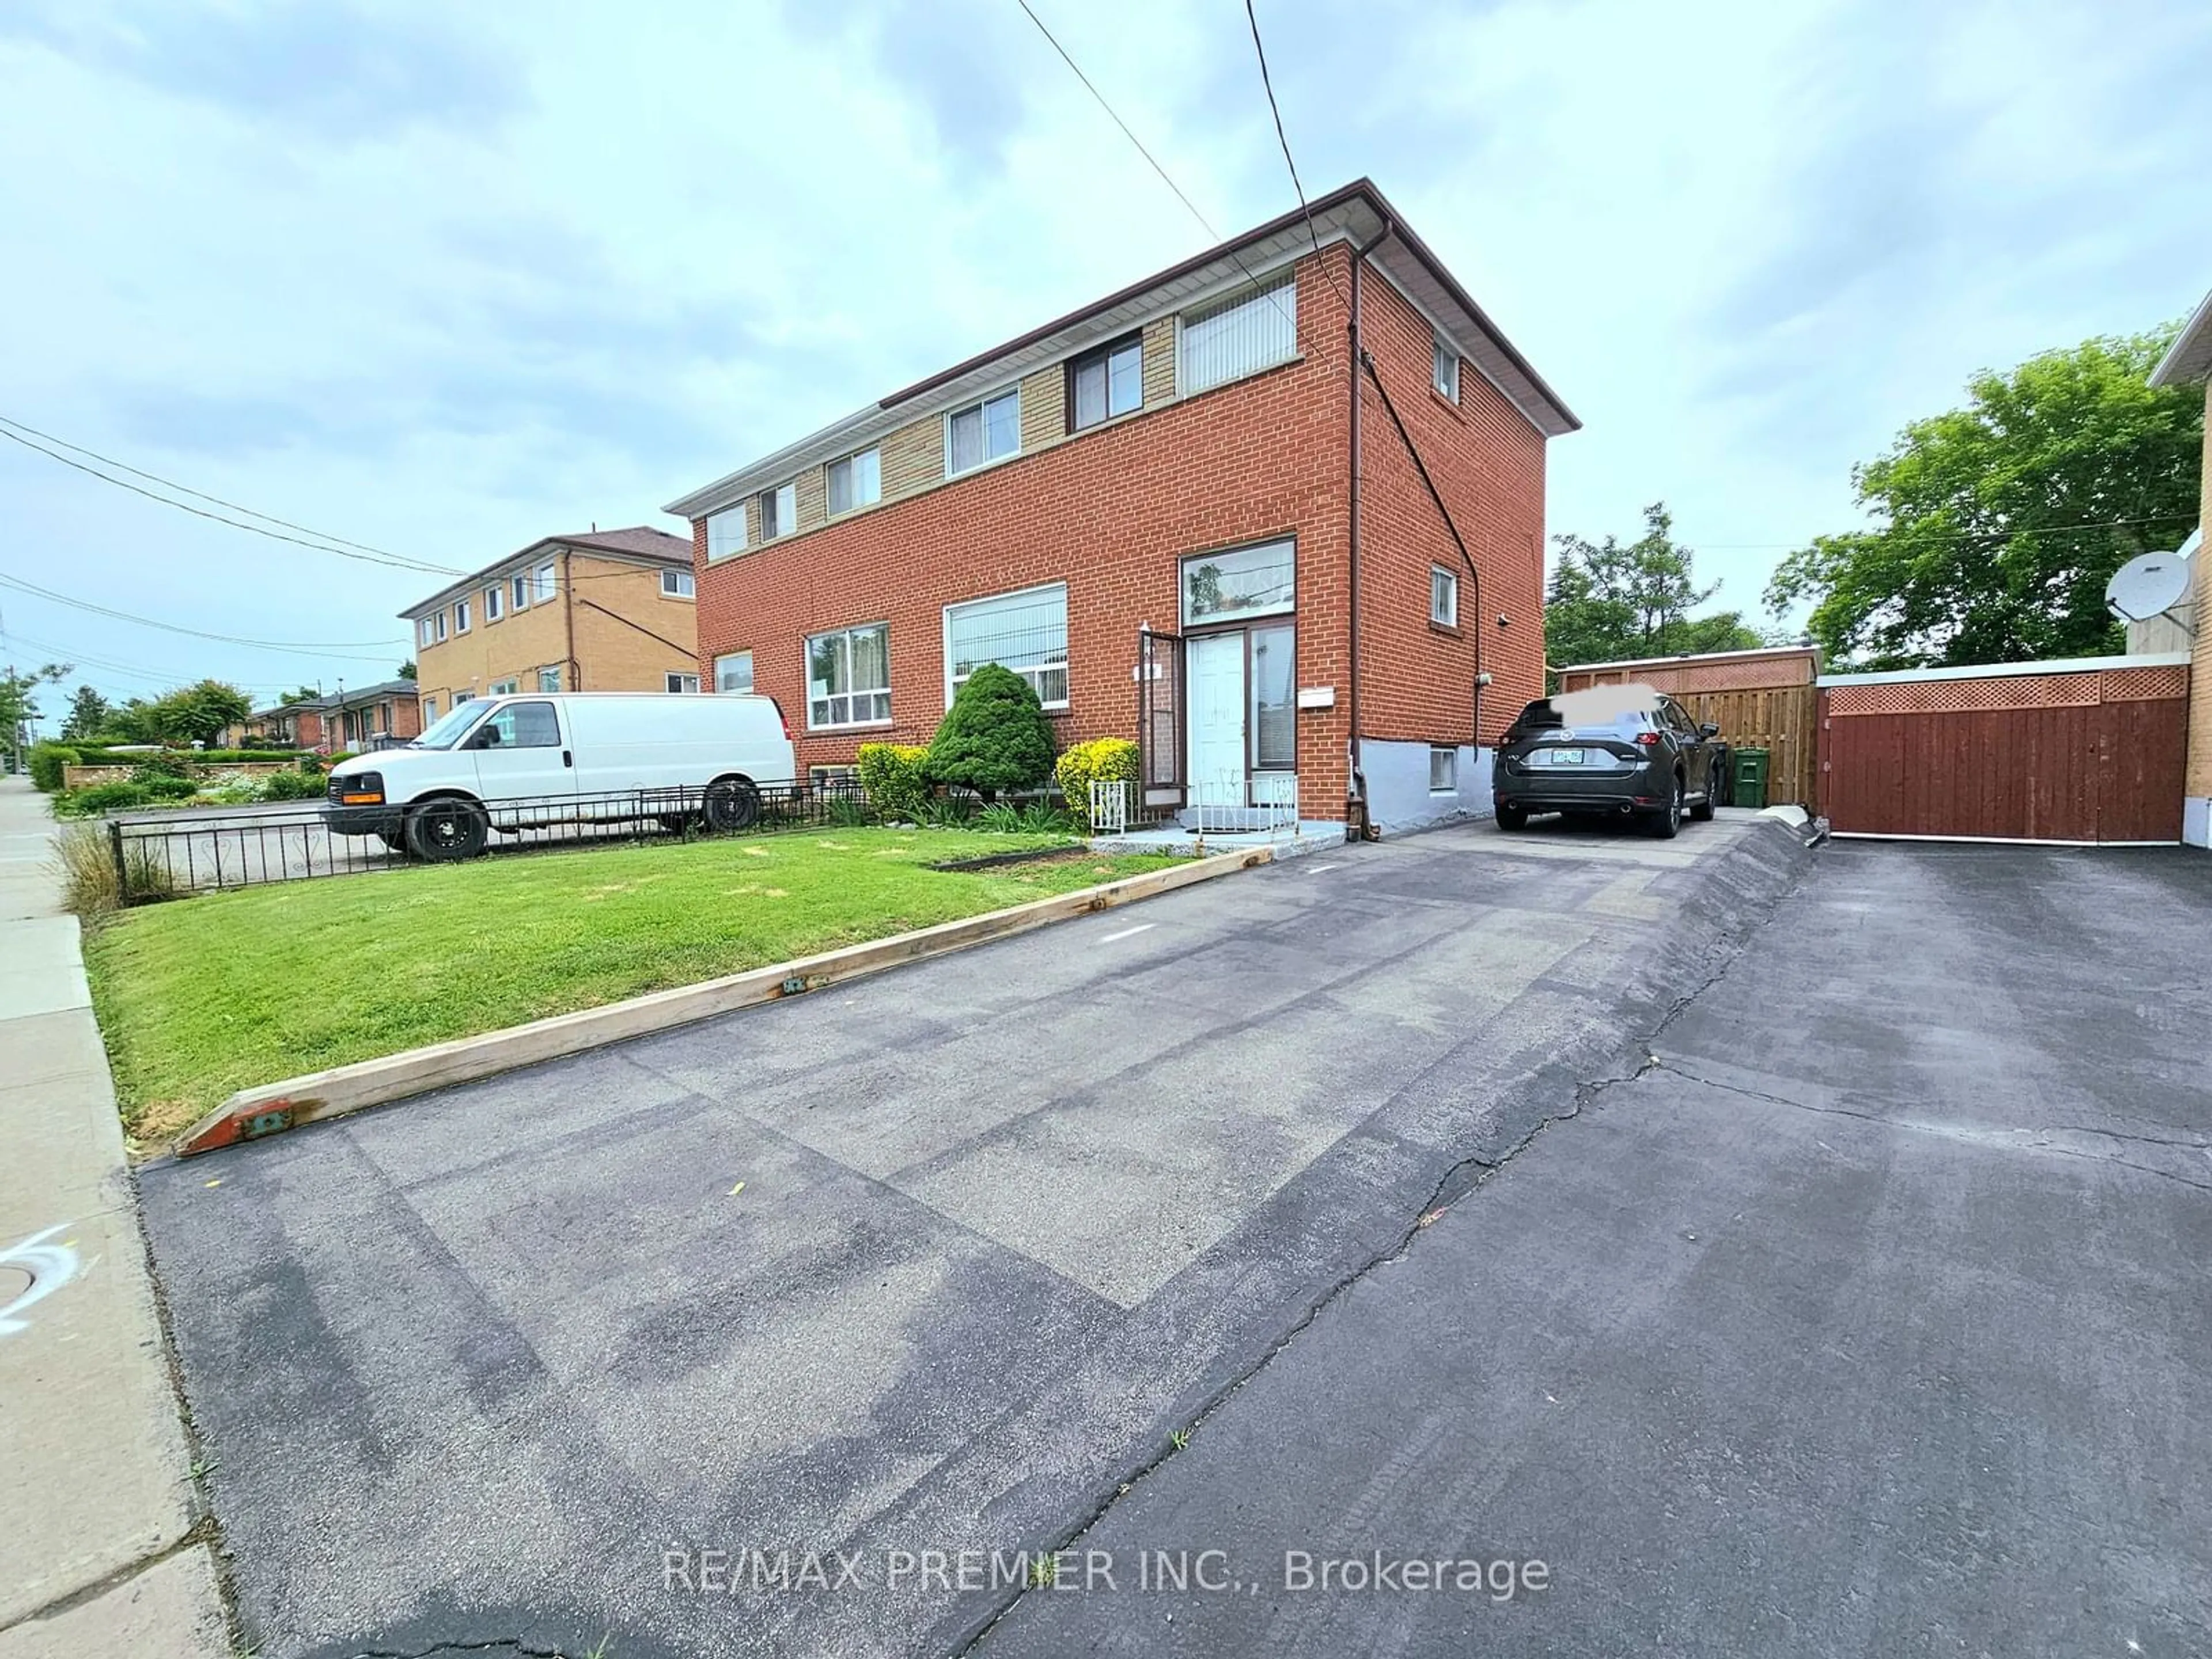 Frontside or backside of a home for 3182 Weston Rd, Toronto Ontario M9M 2T6